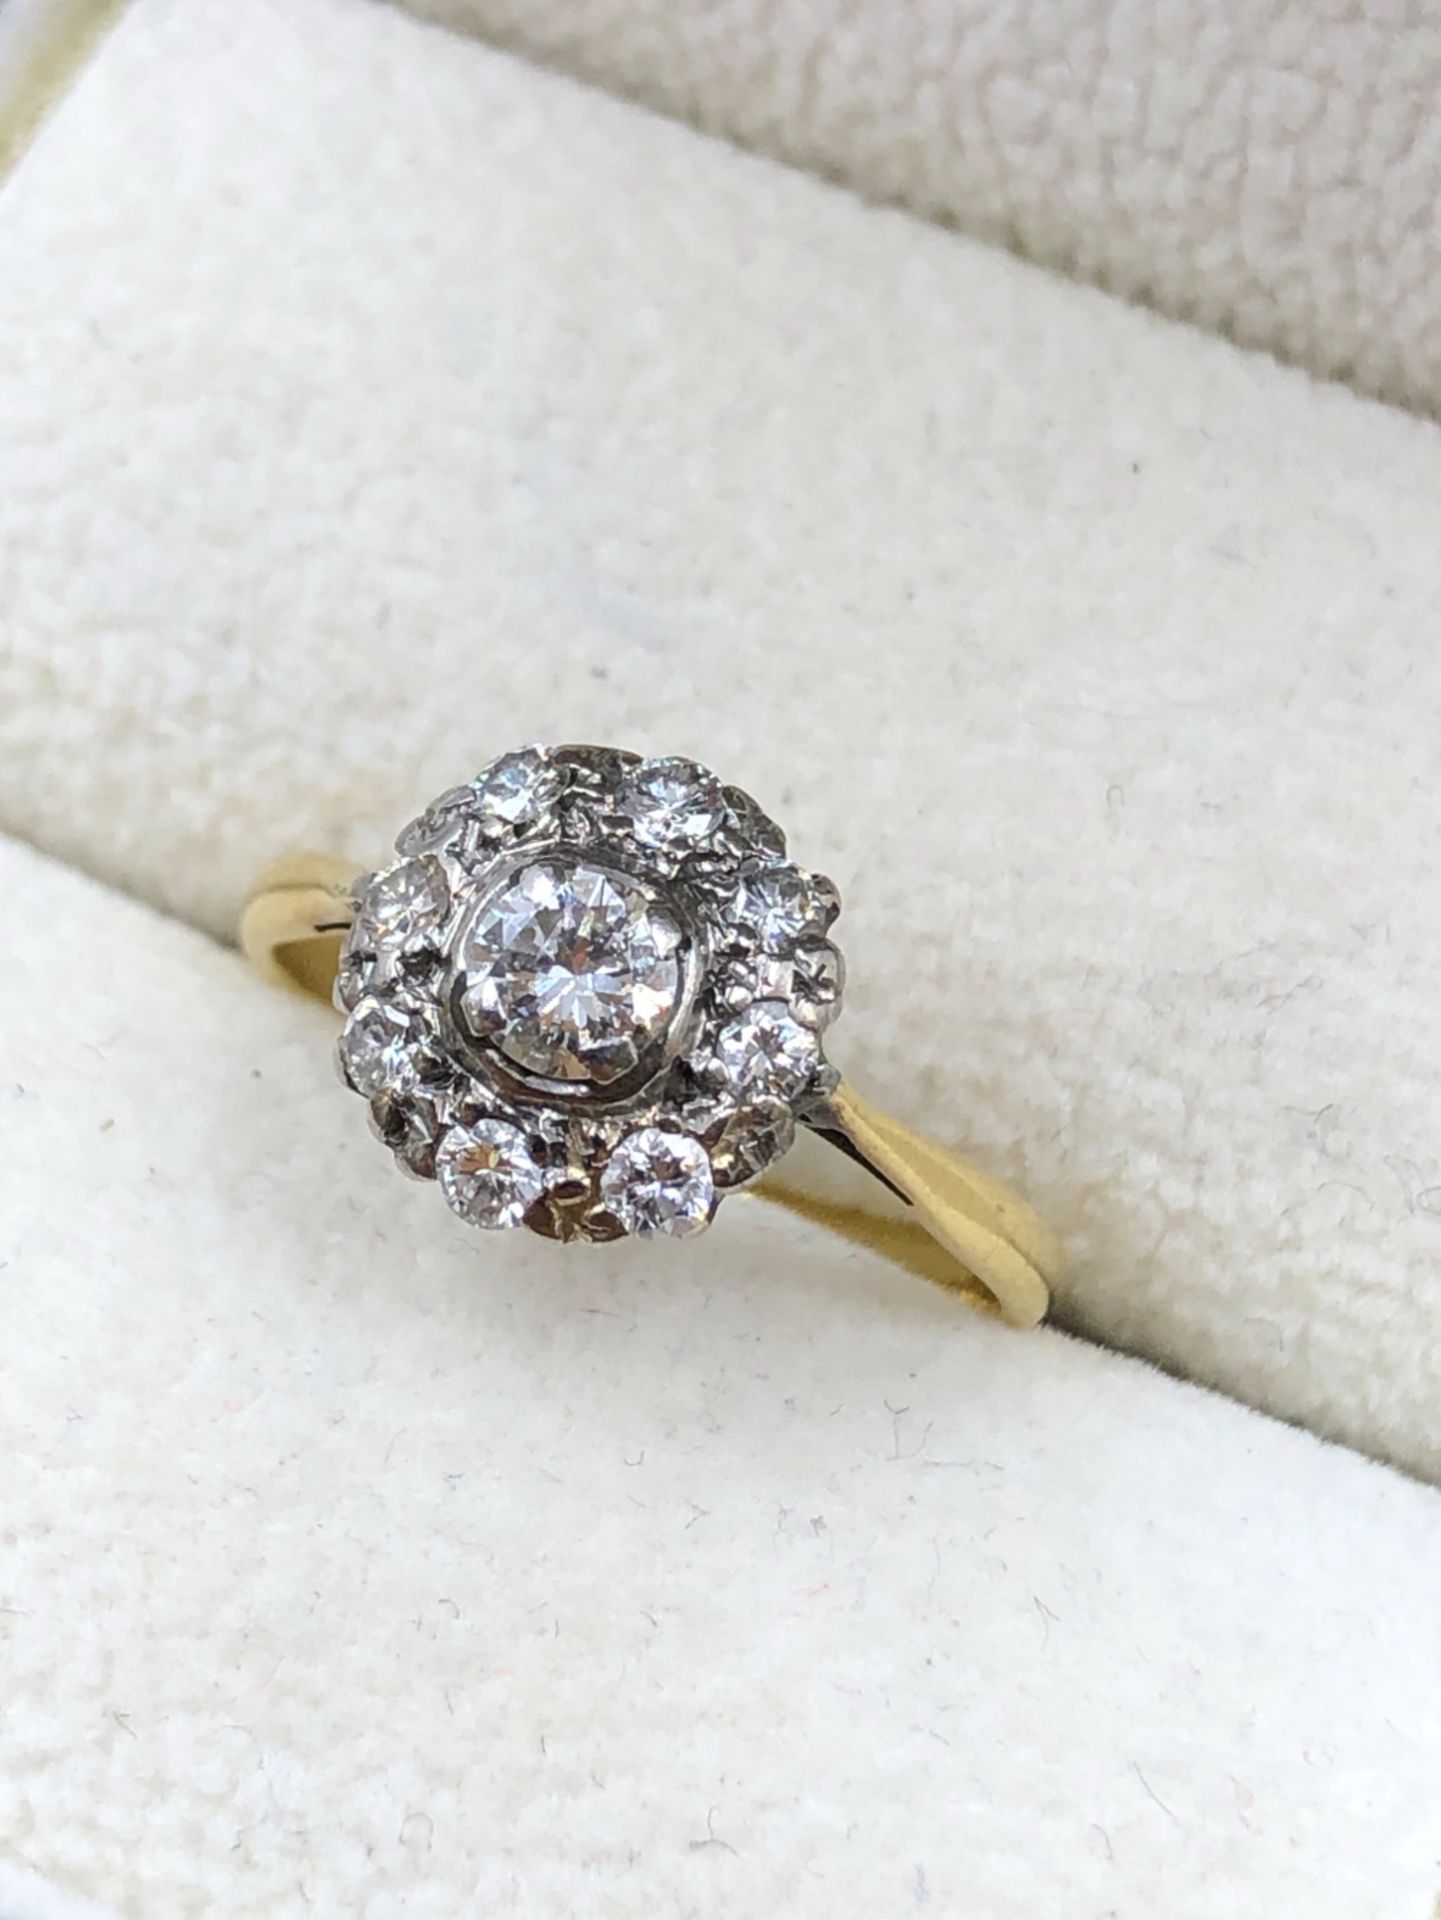 AN ANTIQUE 18ct GOLD AND PLATINUM DIAMOND CLUSTER RING. THE CENTRAL DIAMOND MEASURING 4.5 X 2.5mm,